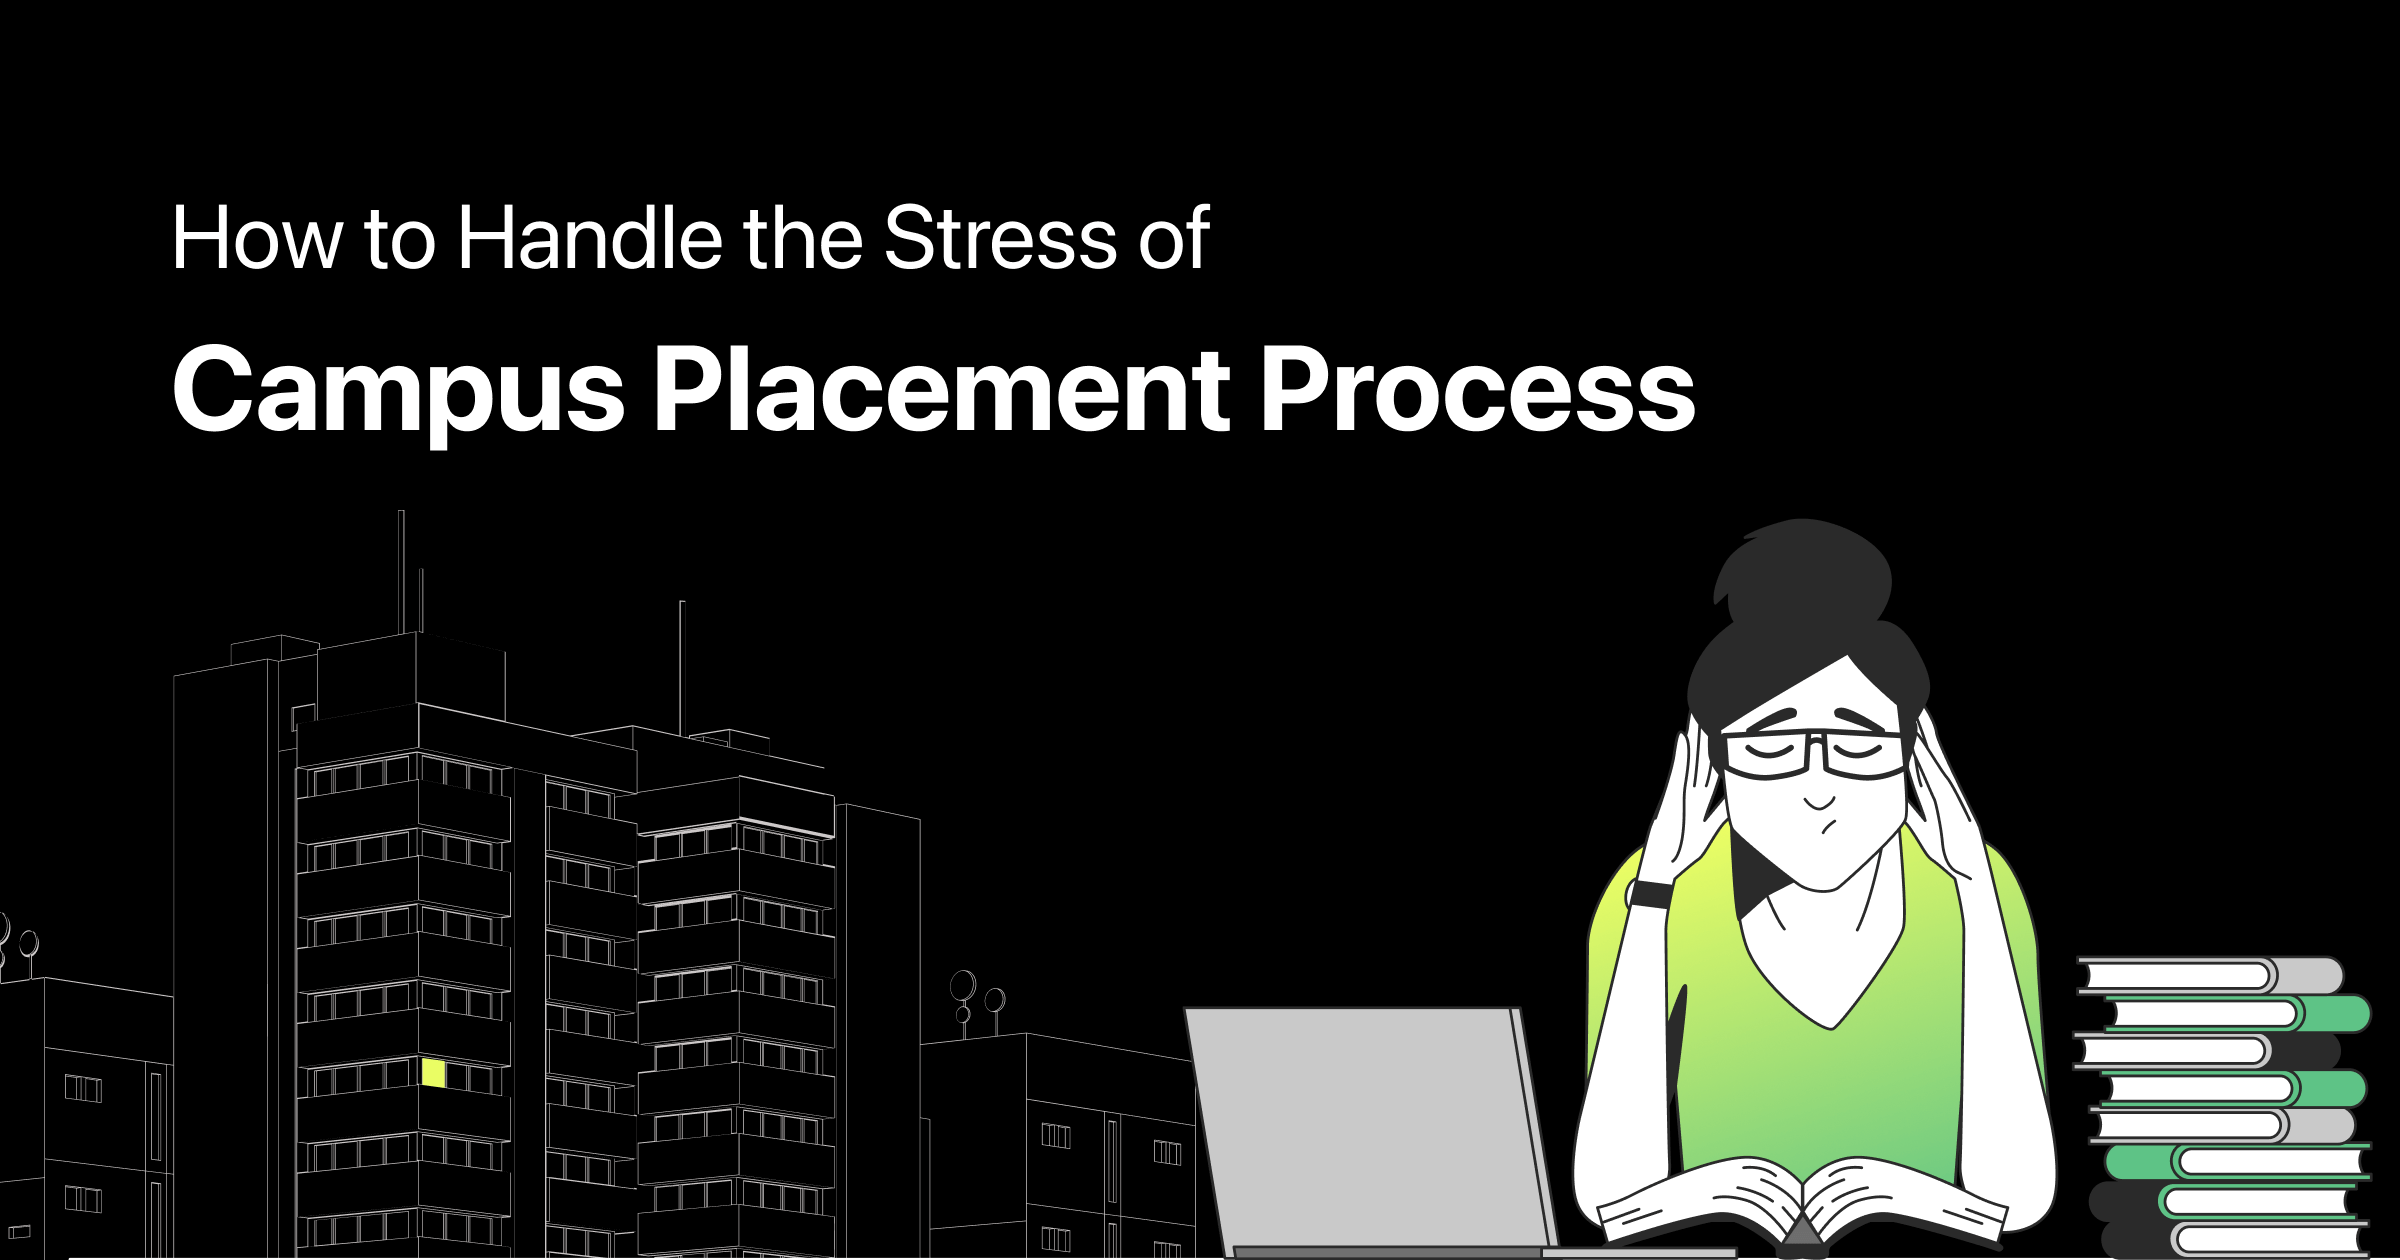 How to Handle the Stress of Campus Placement Process